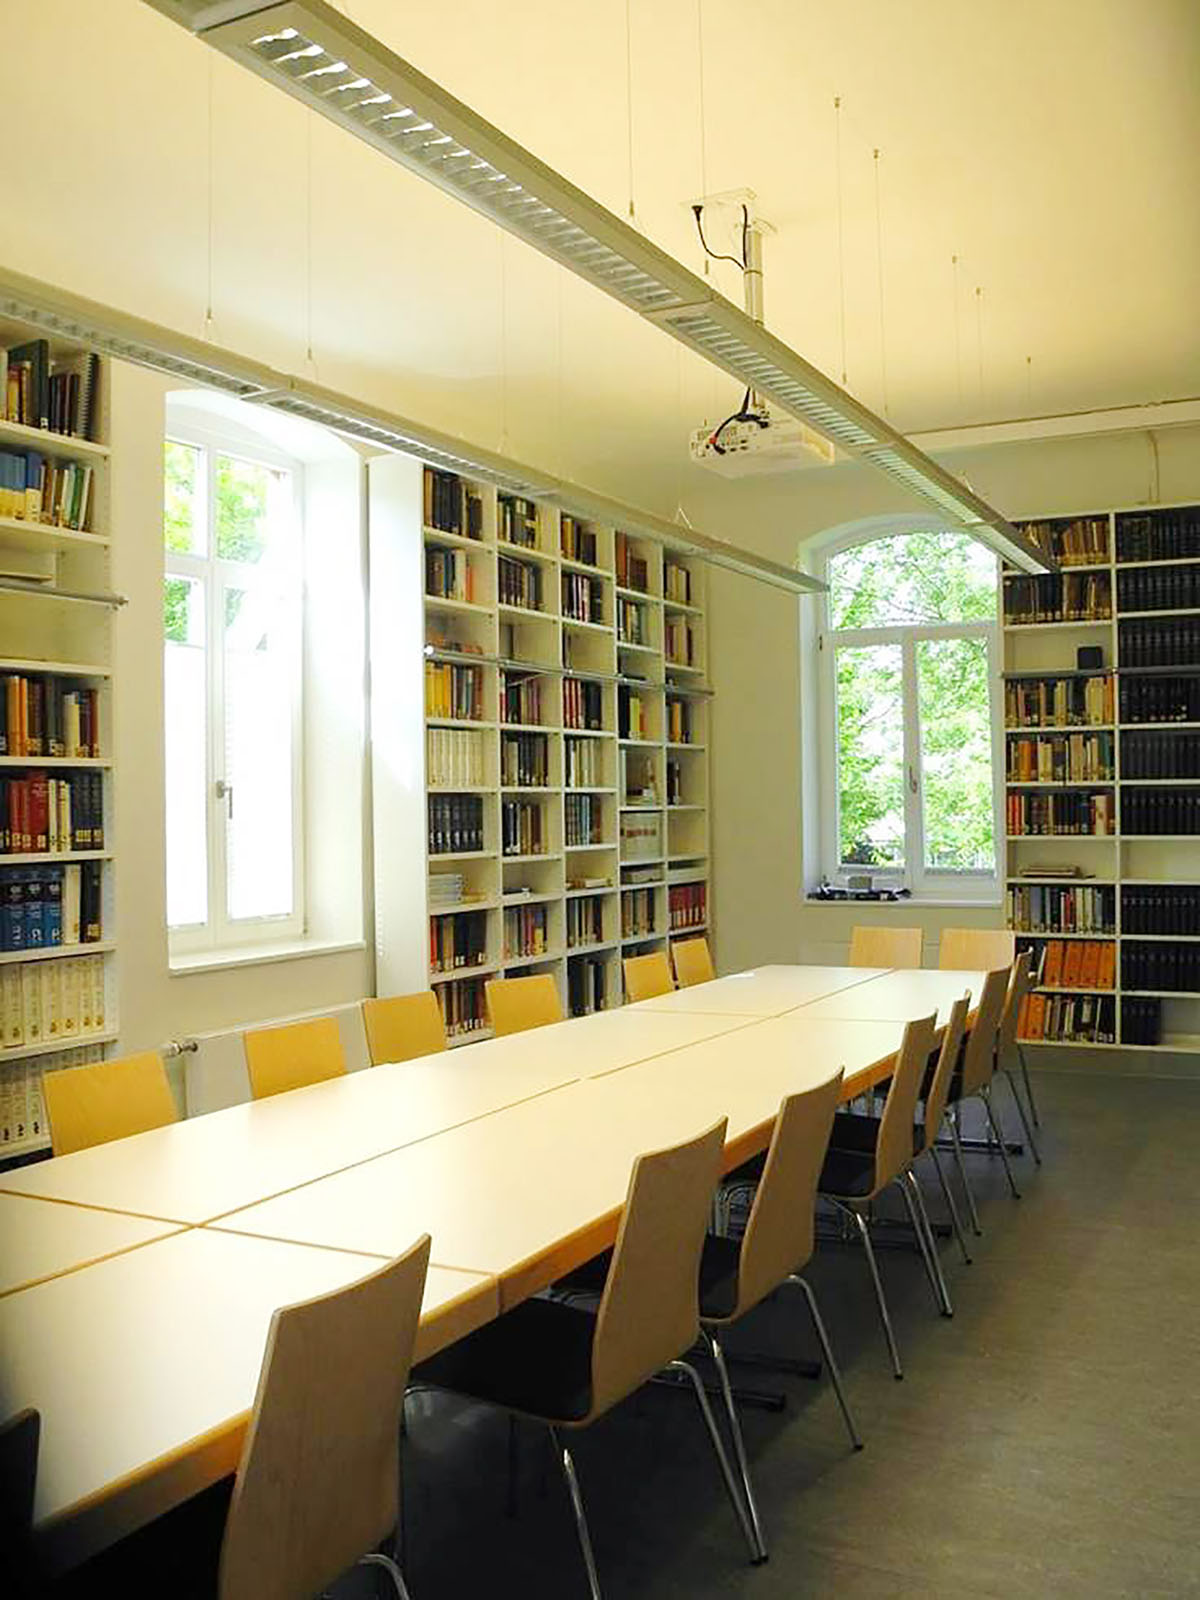 Reconstruction and redevelopment General political science, canon law at the University of Göttingen